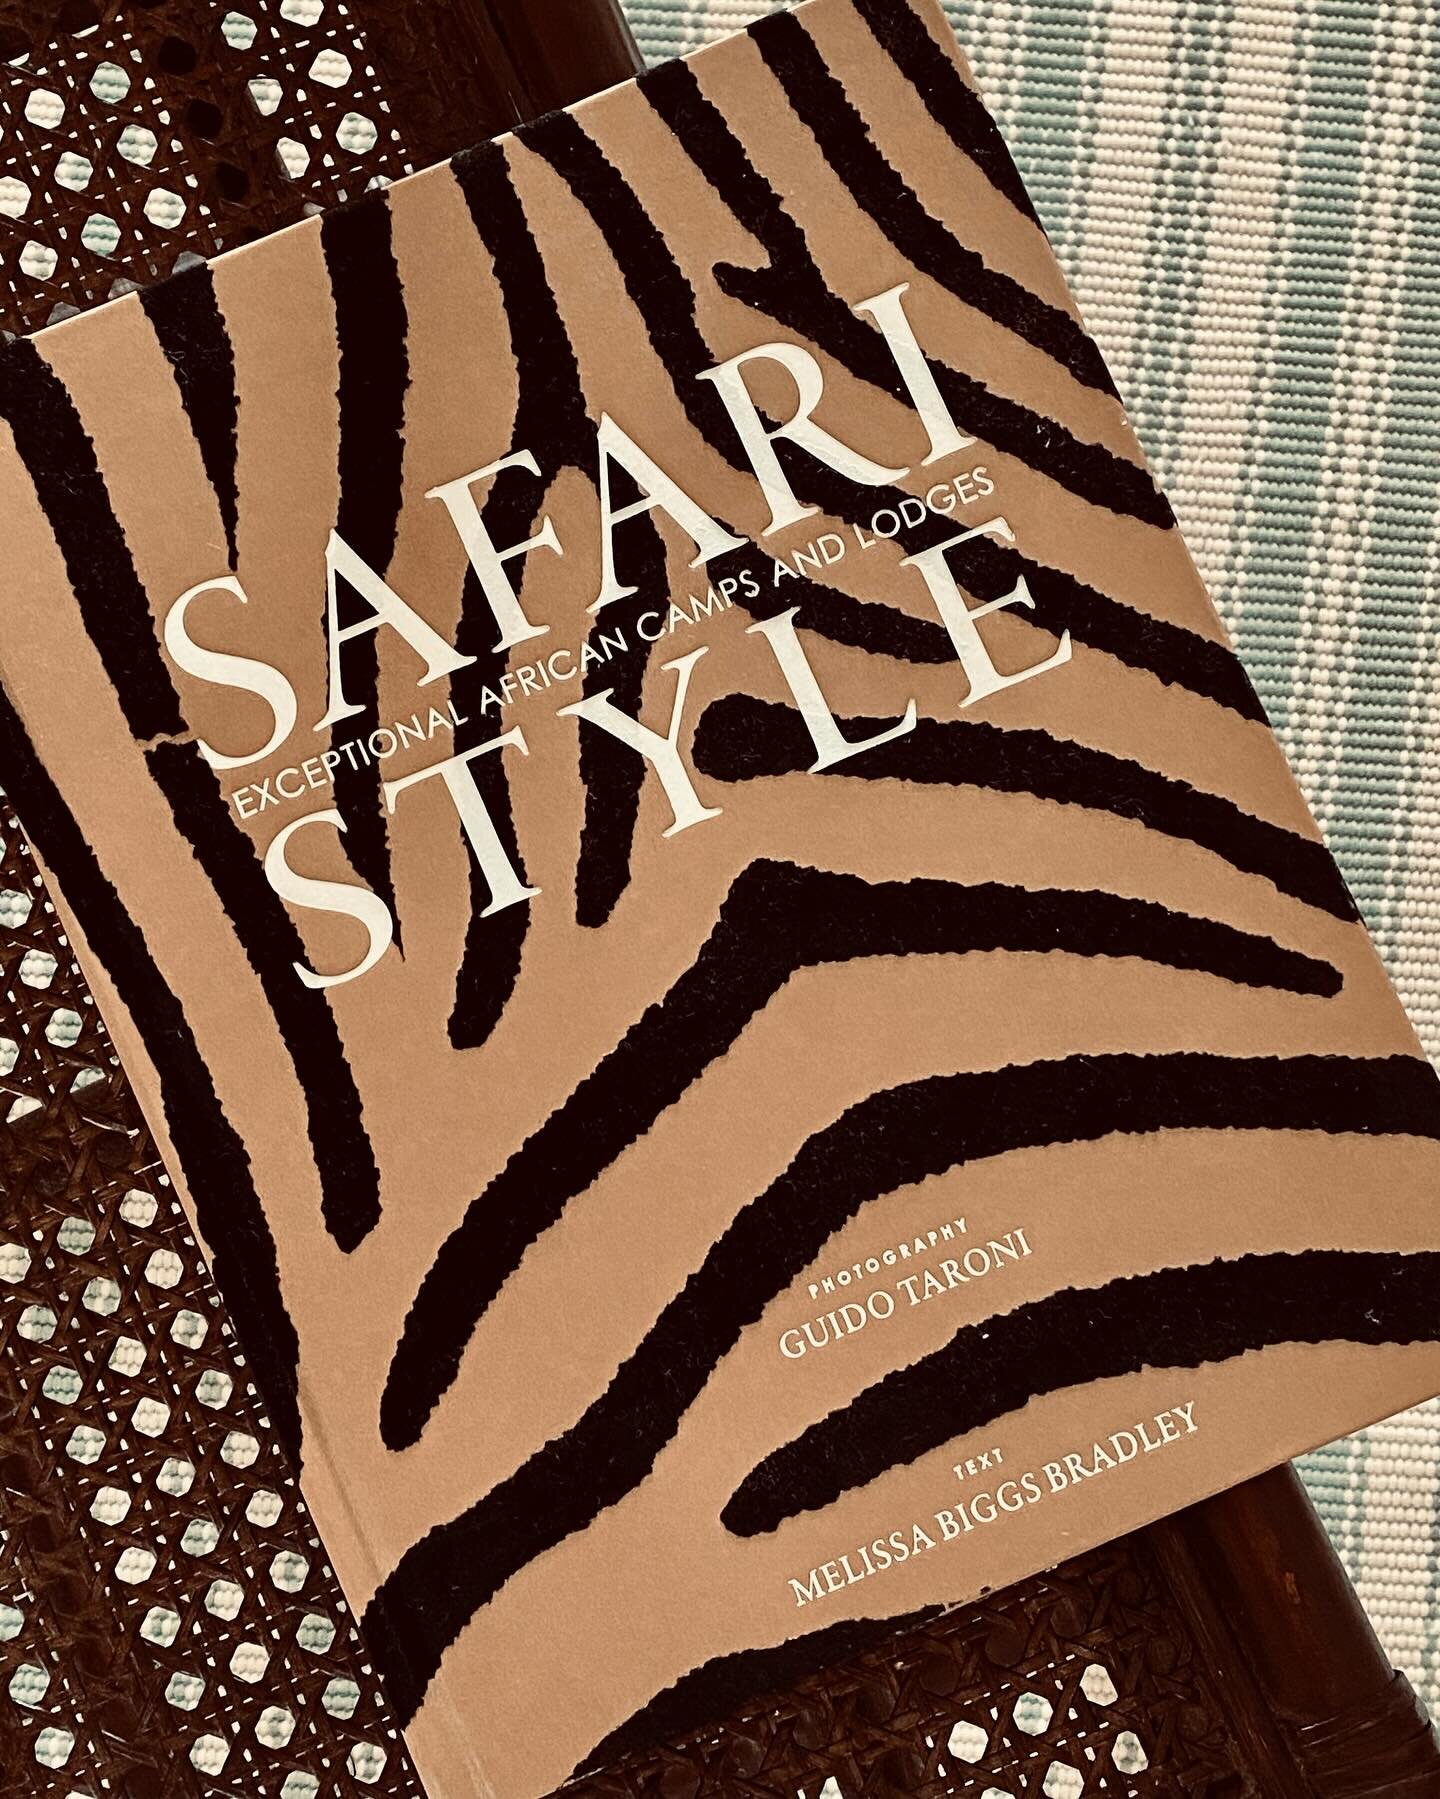 I&rsquo;m currently reading through this amazing book - it&rsquo;s a must for anyone who loves safari + interiors + architecture + sustainability, it&rsquo;s a fascinating read with beautiful imagery of interiors and the diverse African landscape. 

